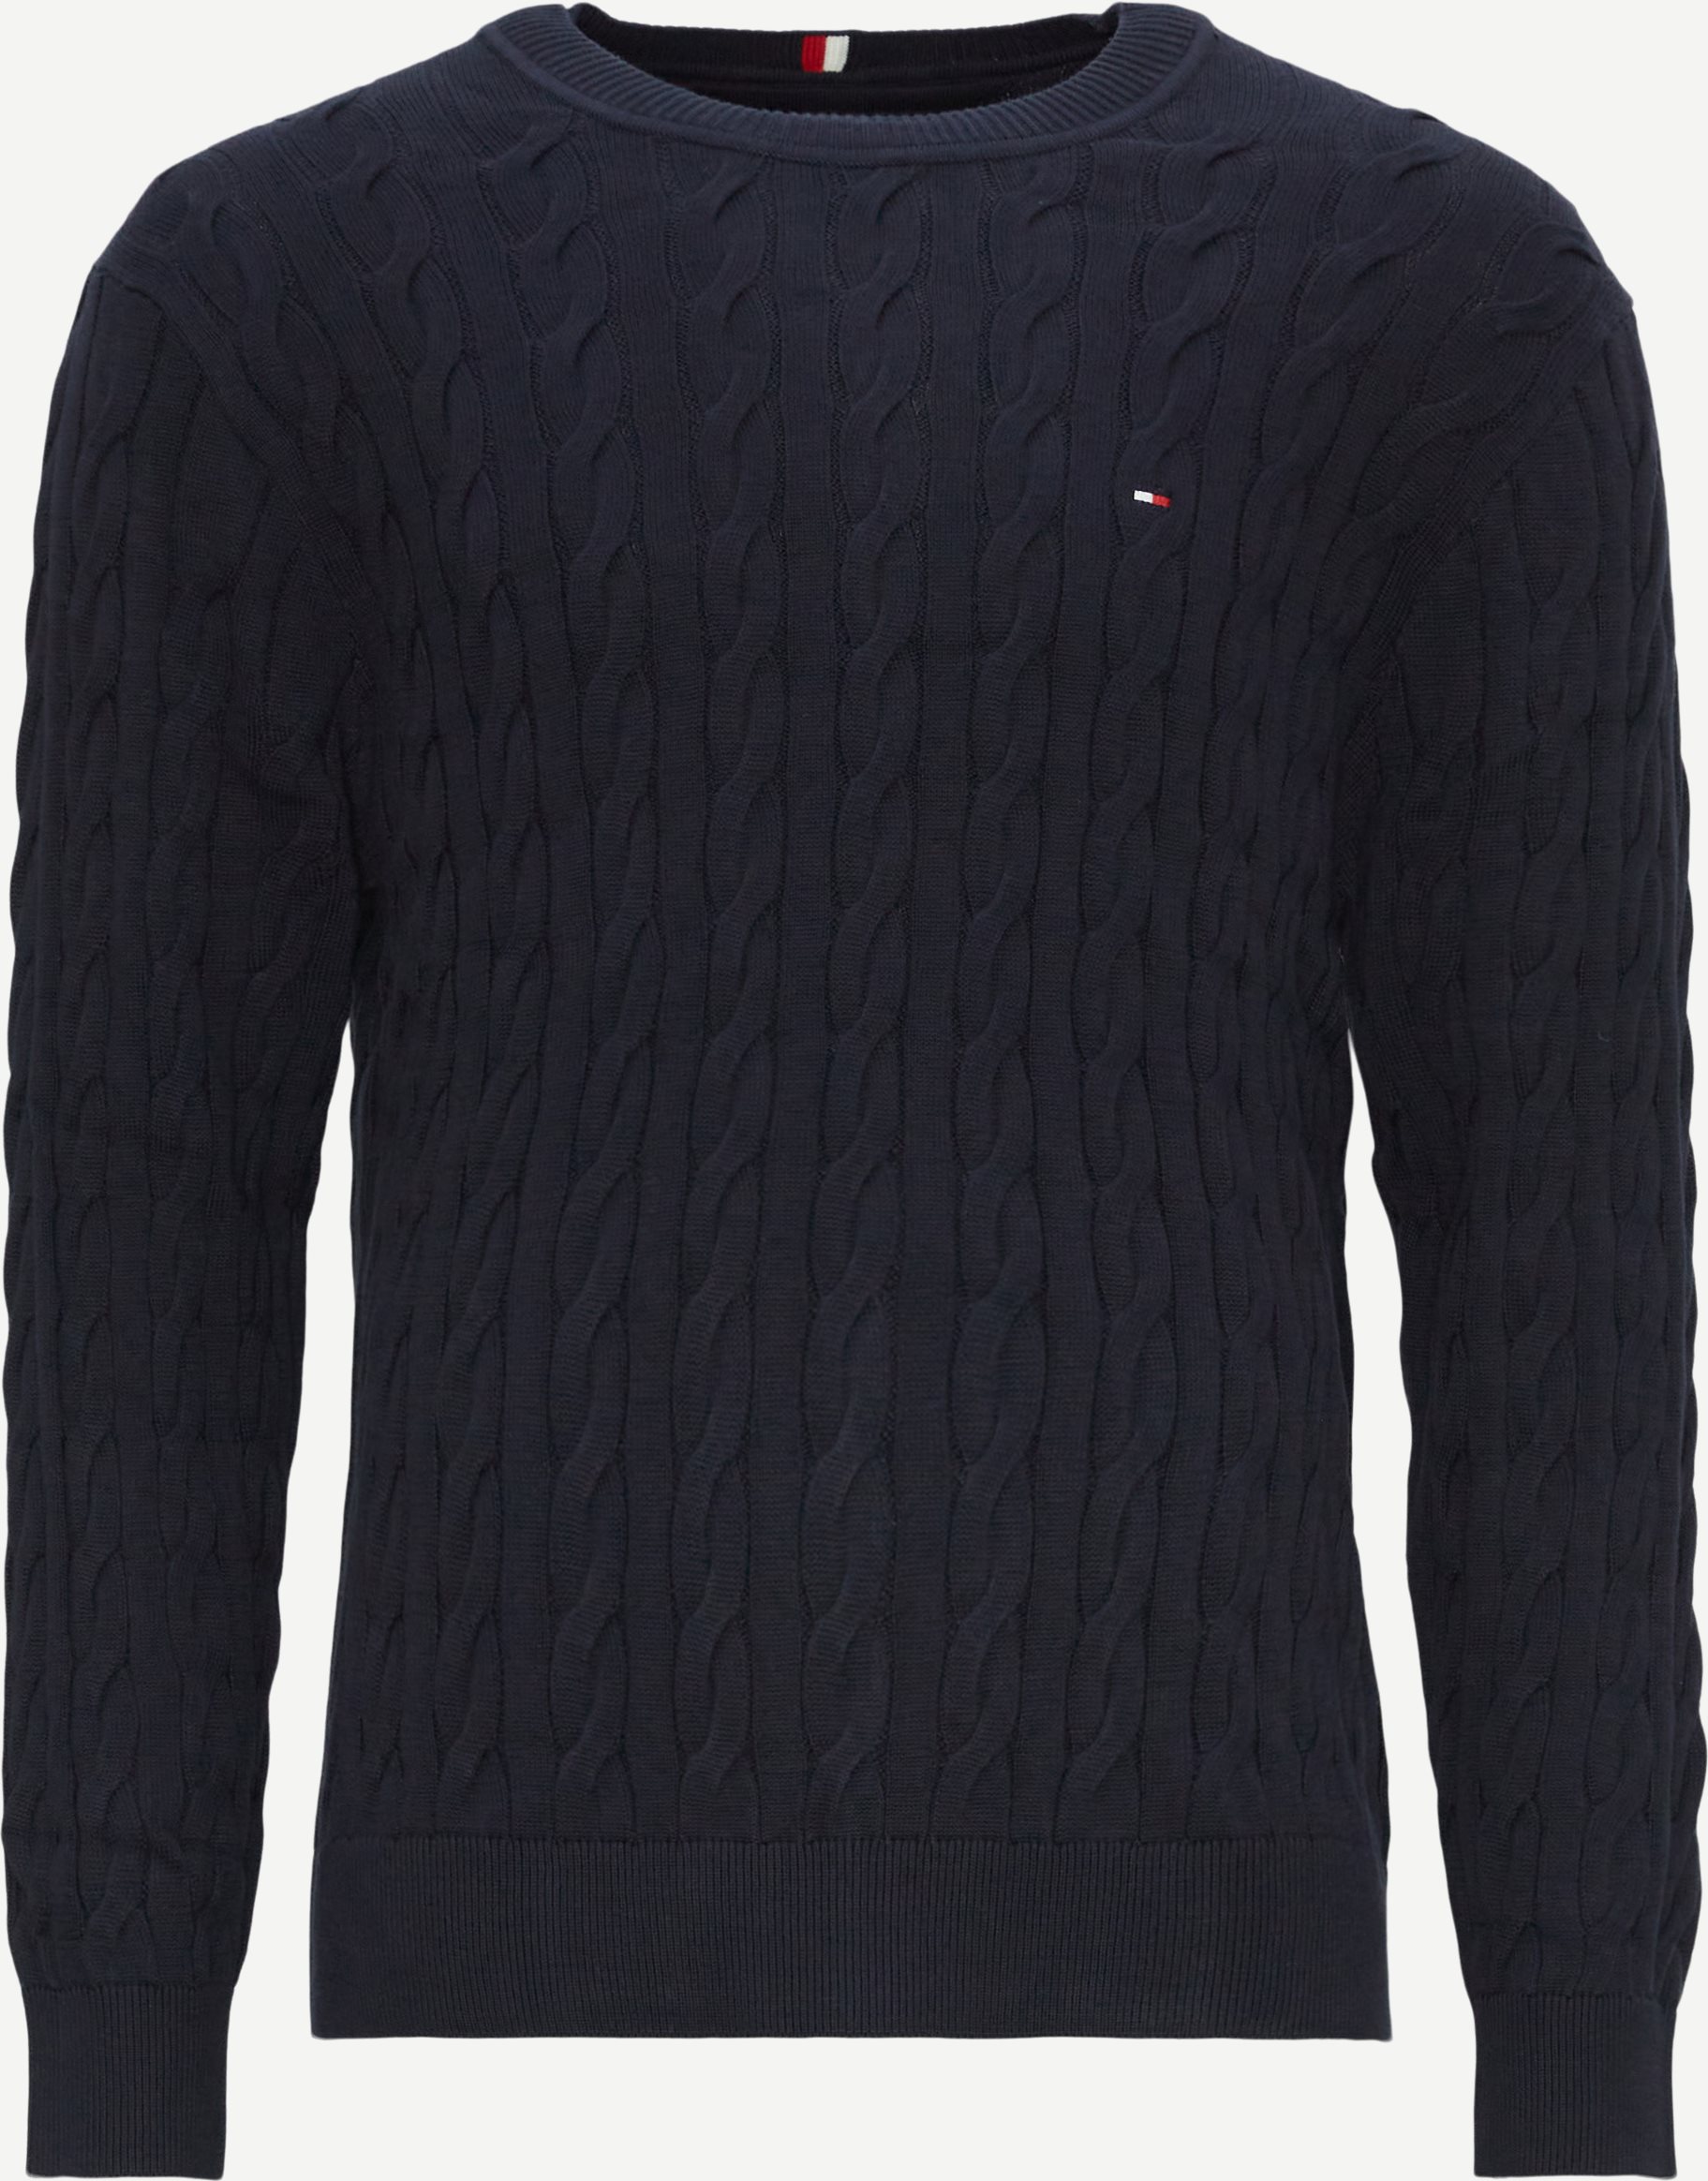 Tommy Hilfiger Knitwear 33132 CLASSIC CABLE CREW NECK Blue